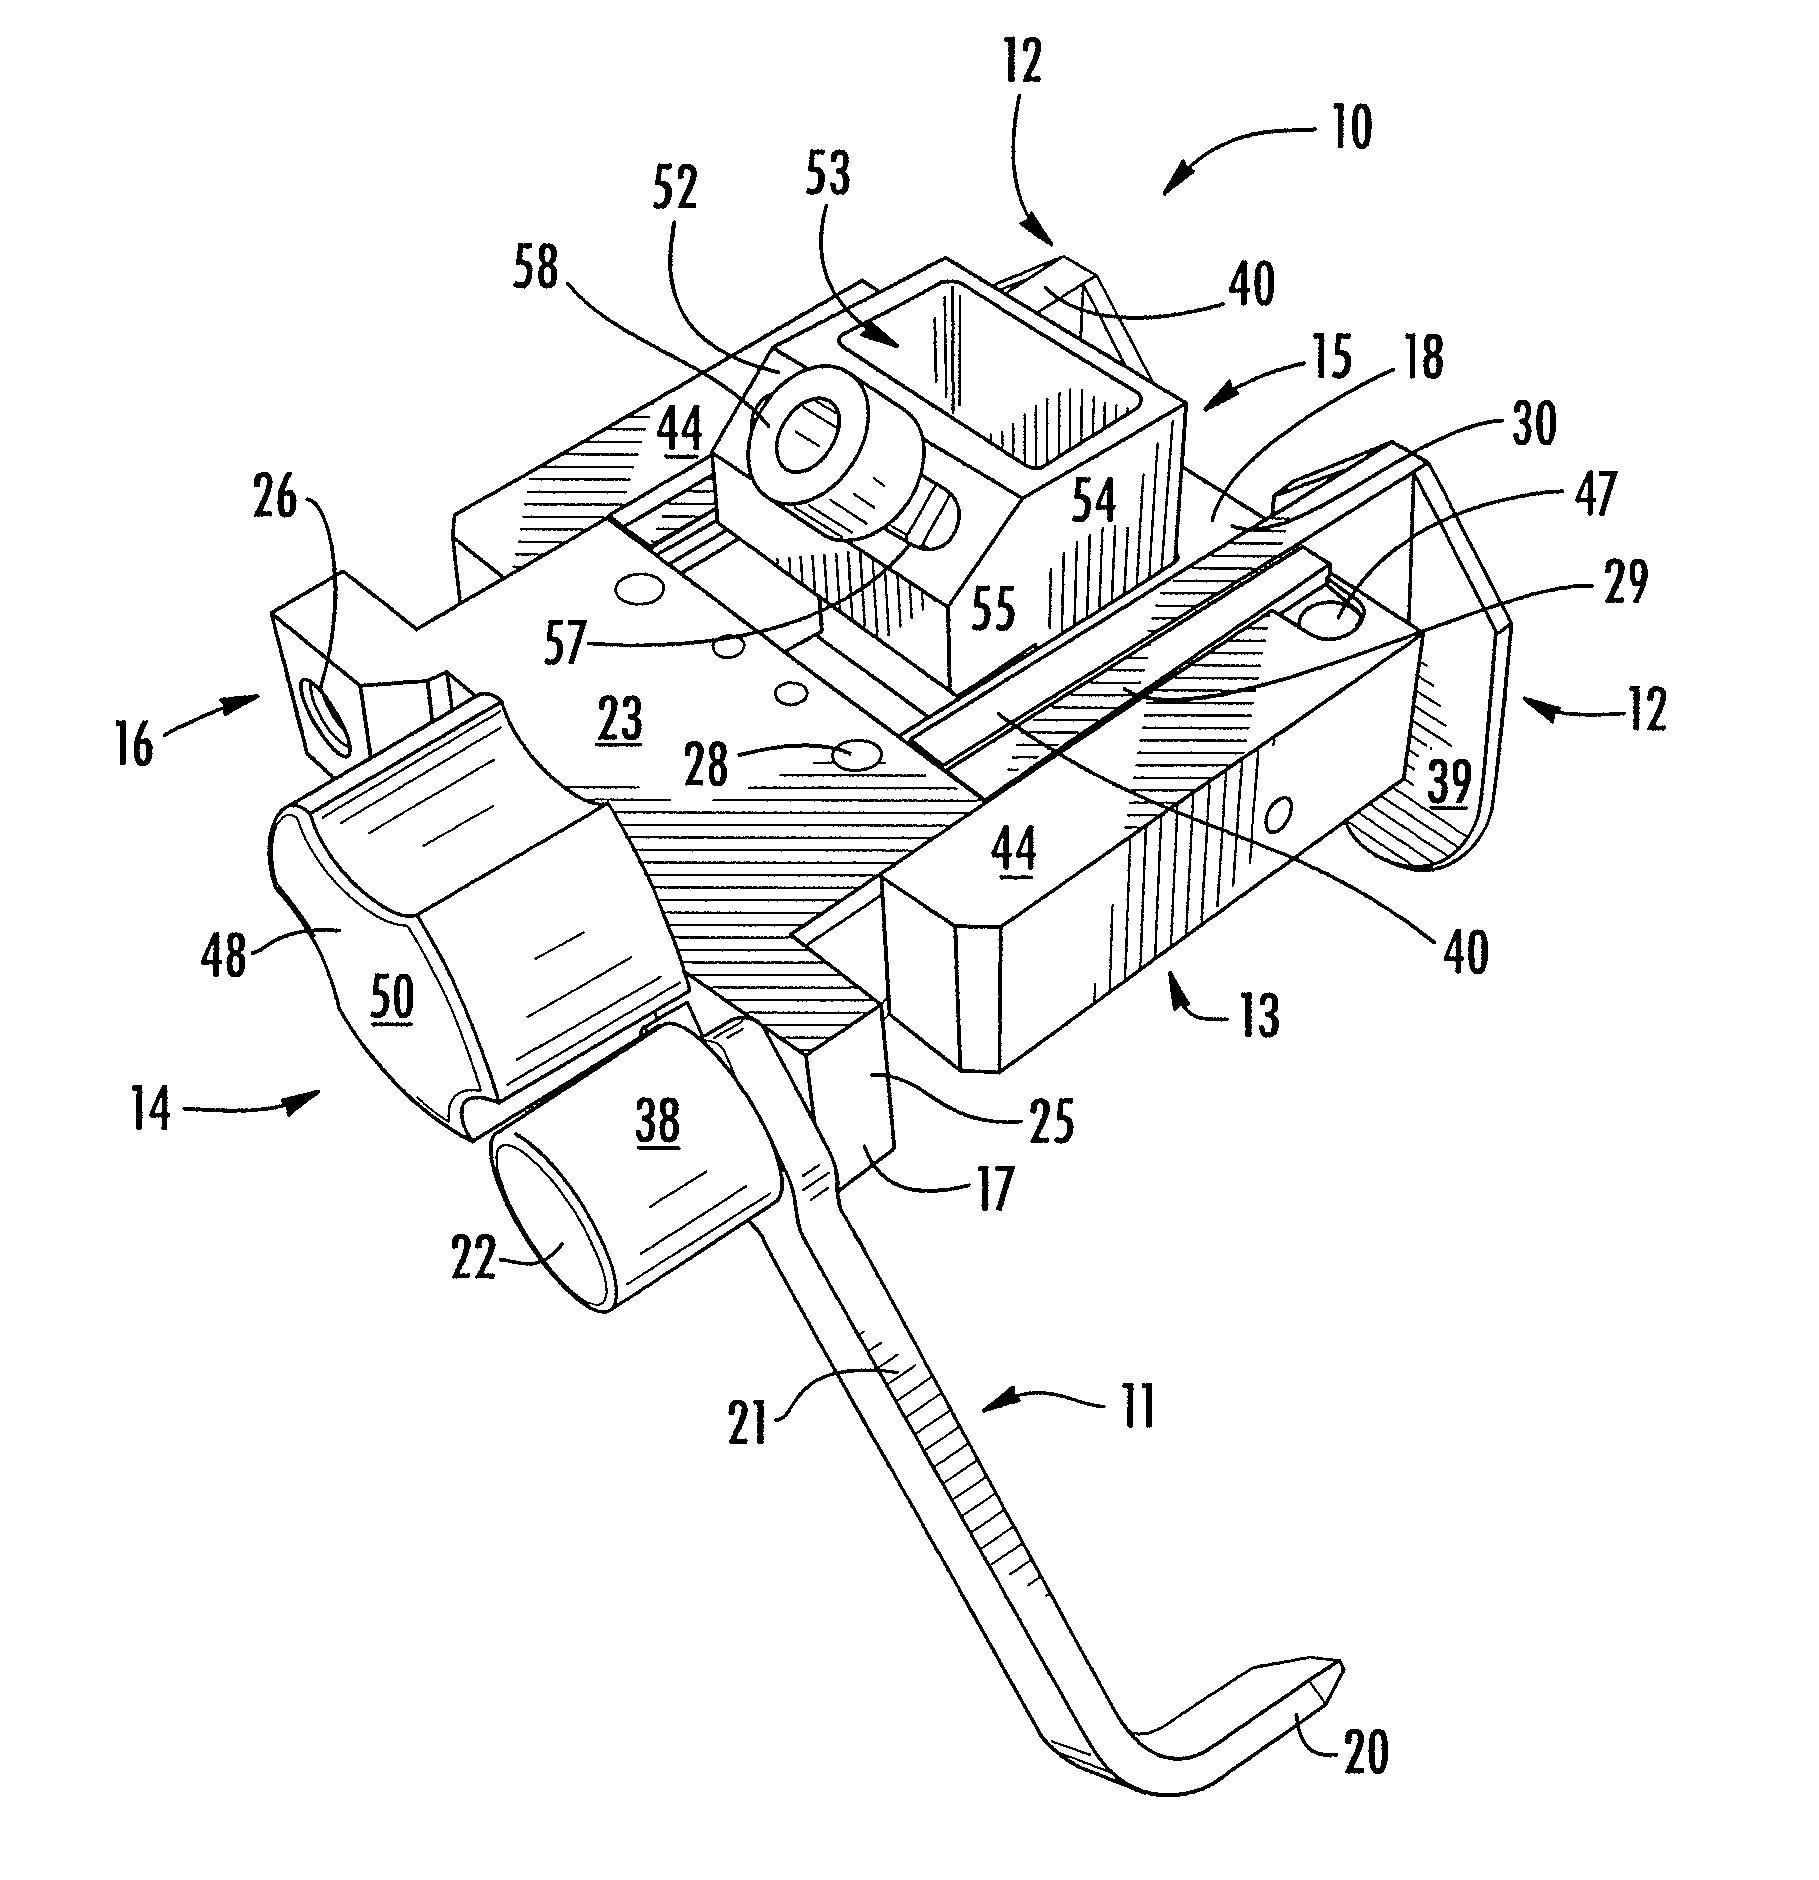 Reference mark adjustment mechanism for a femoral caliper and method of using the same